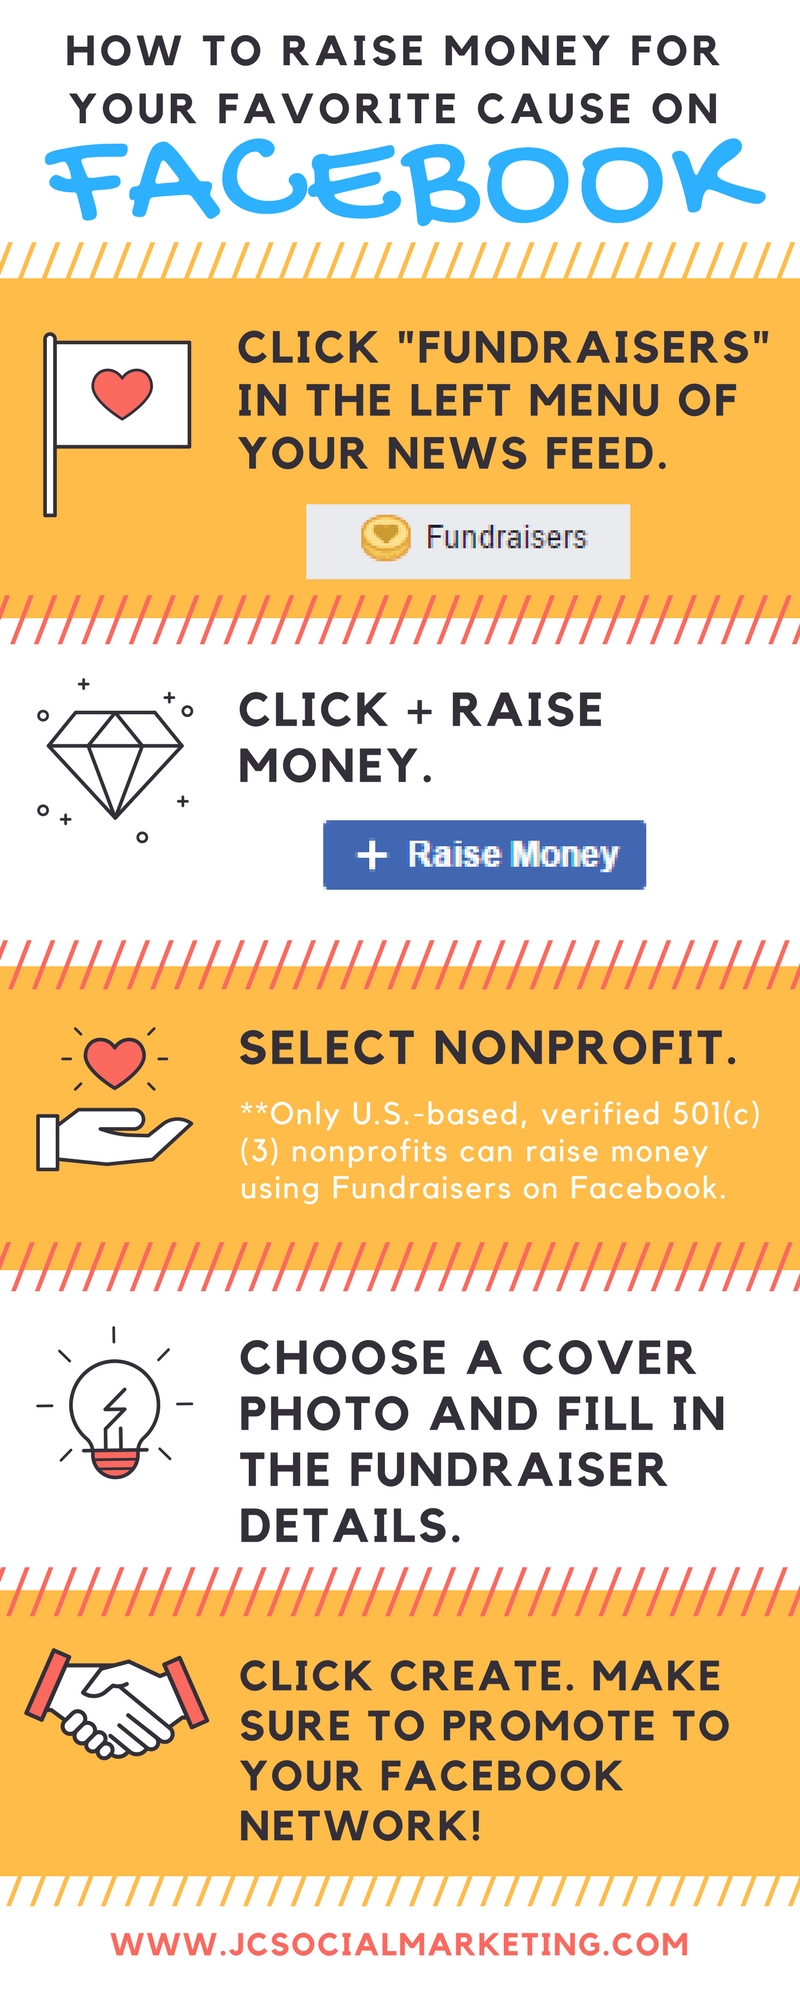 How to Raise Money For Your Favorite Cause On Facebook